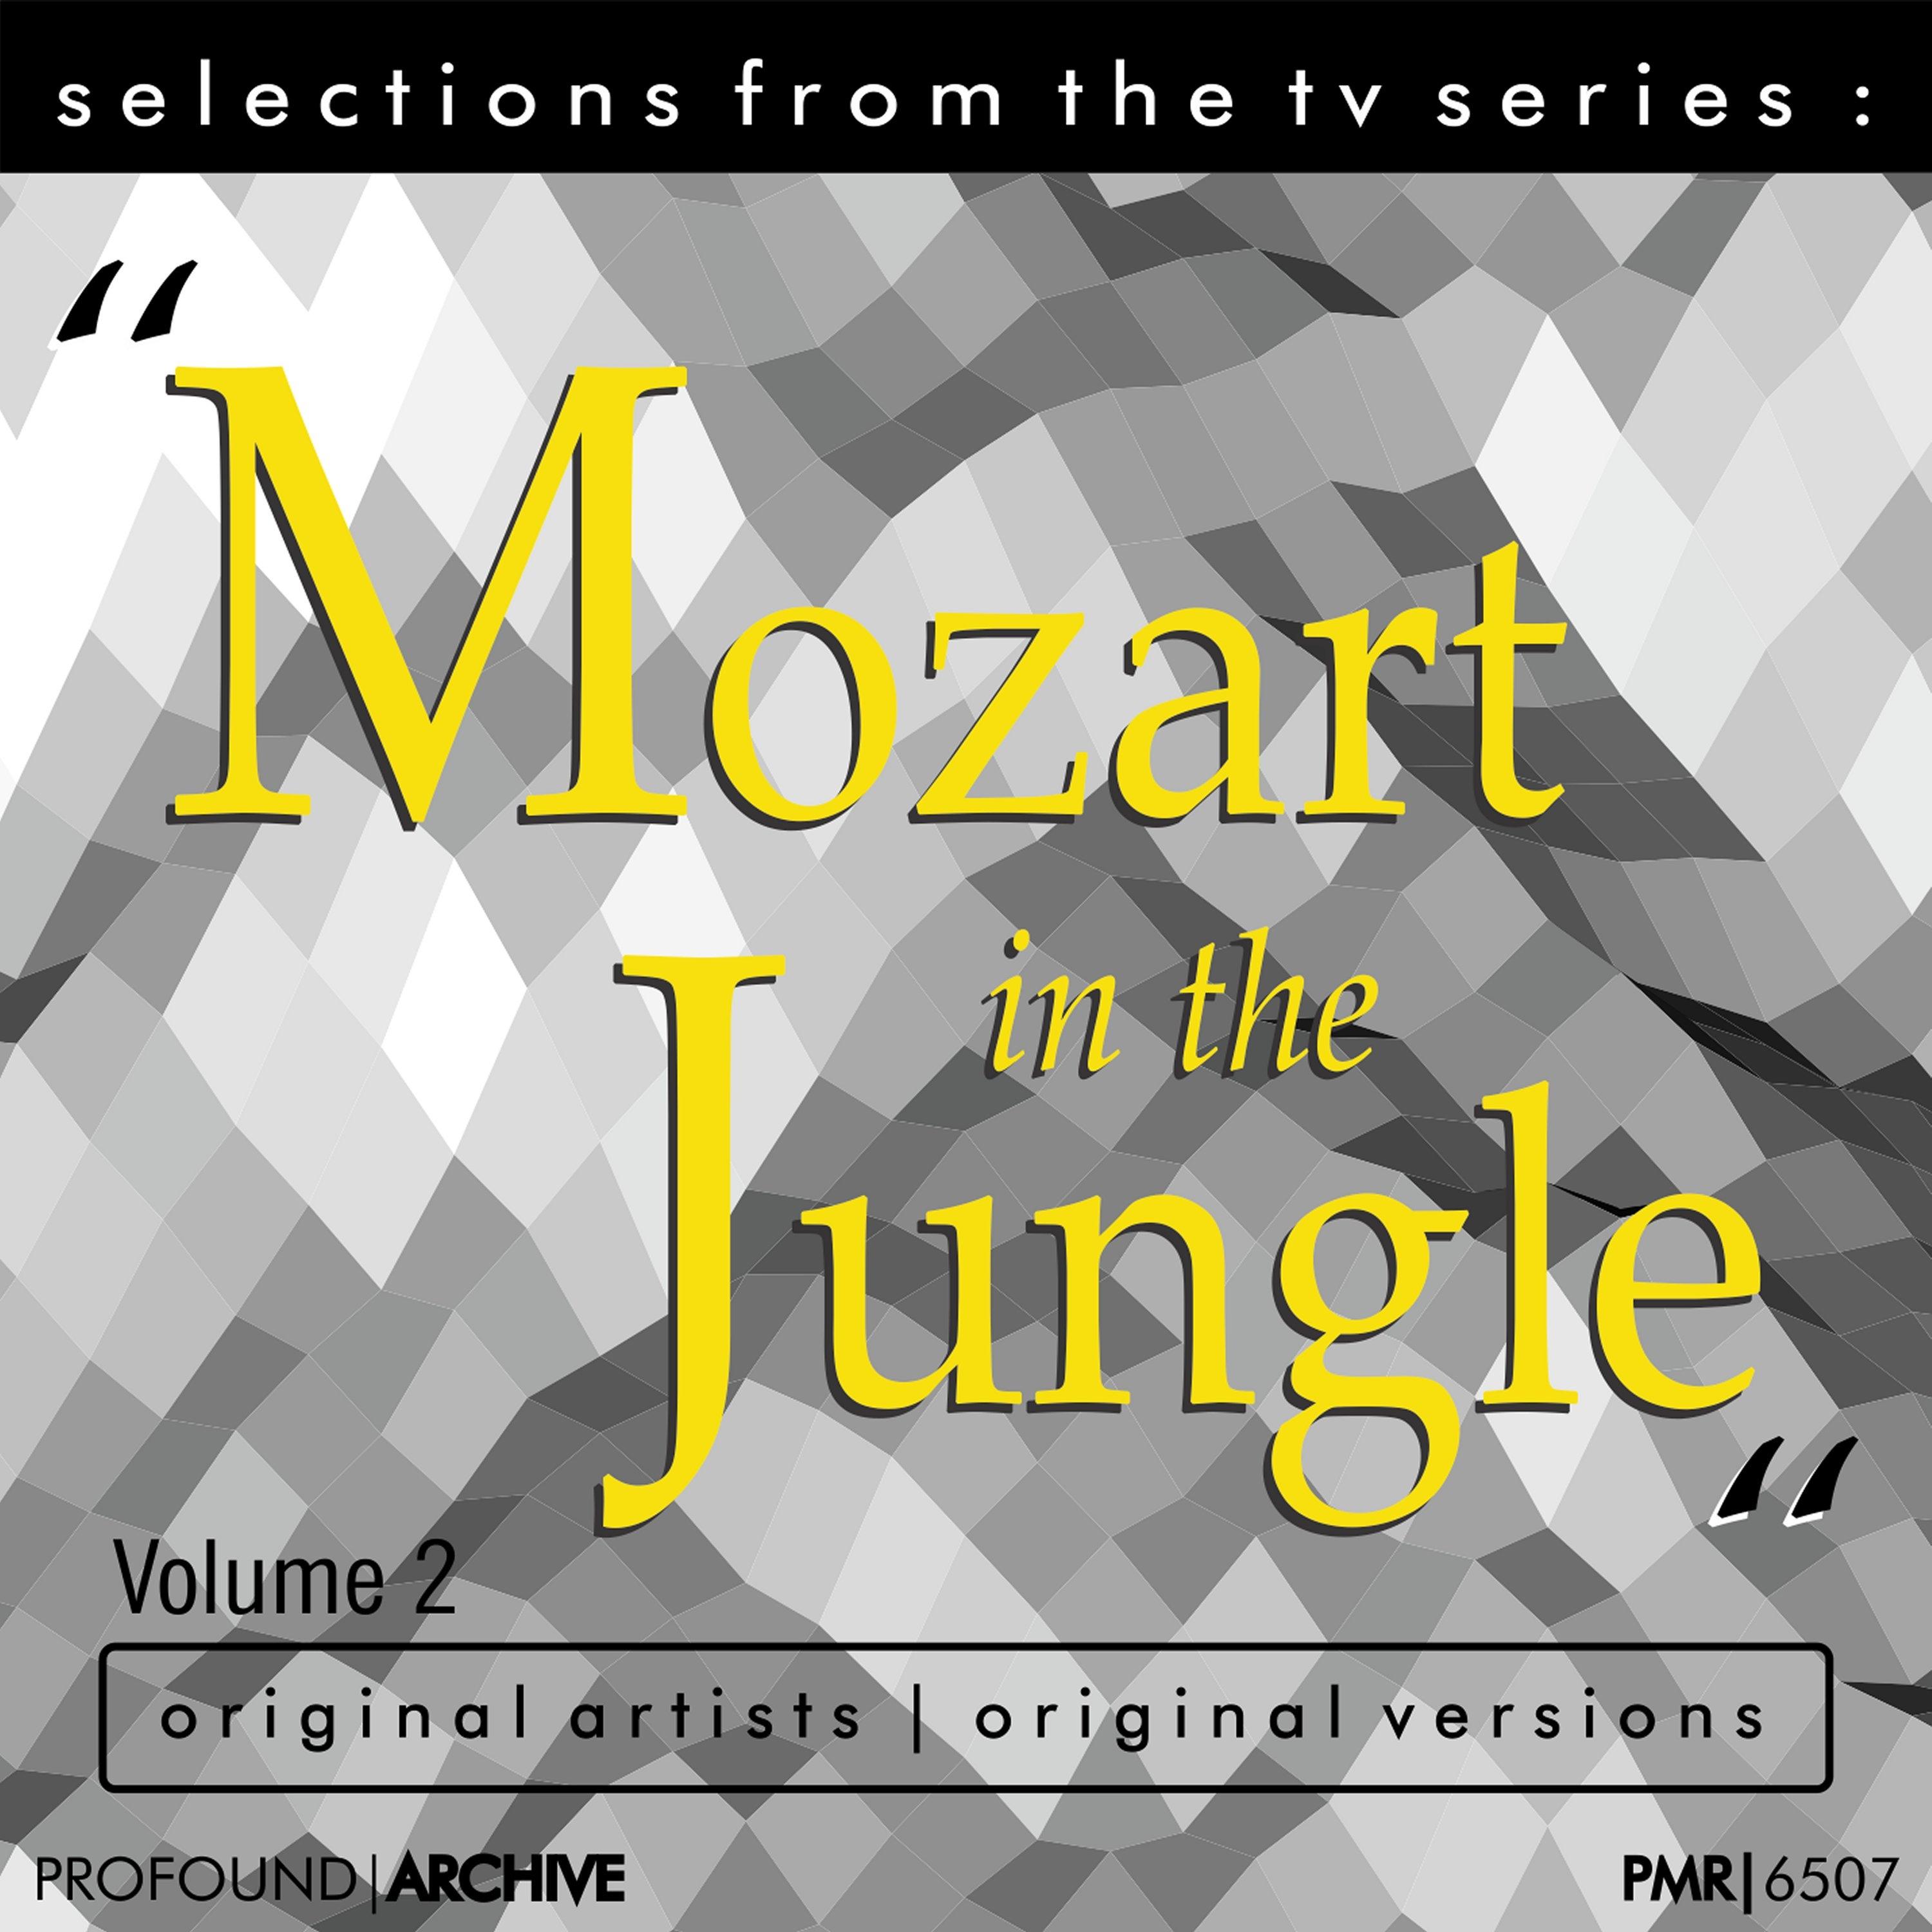 Selections from the TV Serie Mozart in the Jungle Volume 2